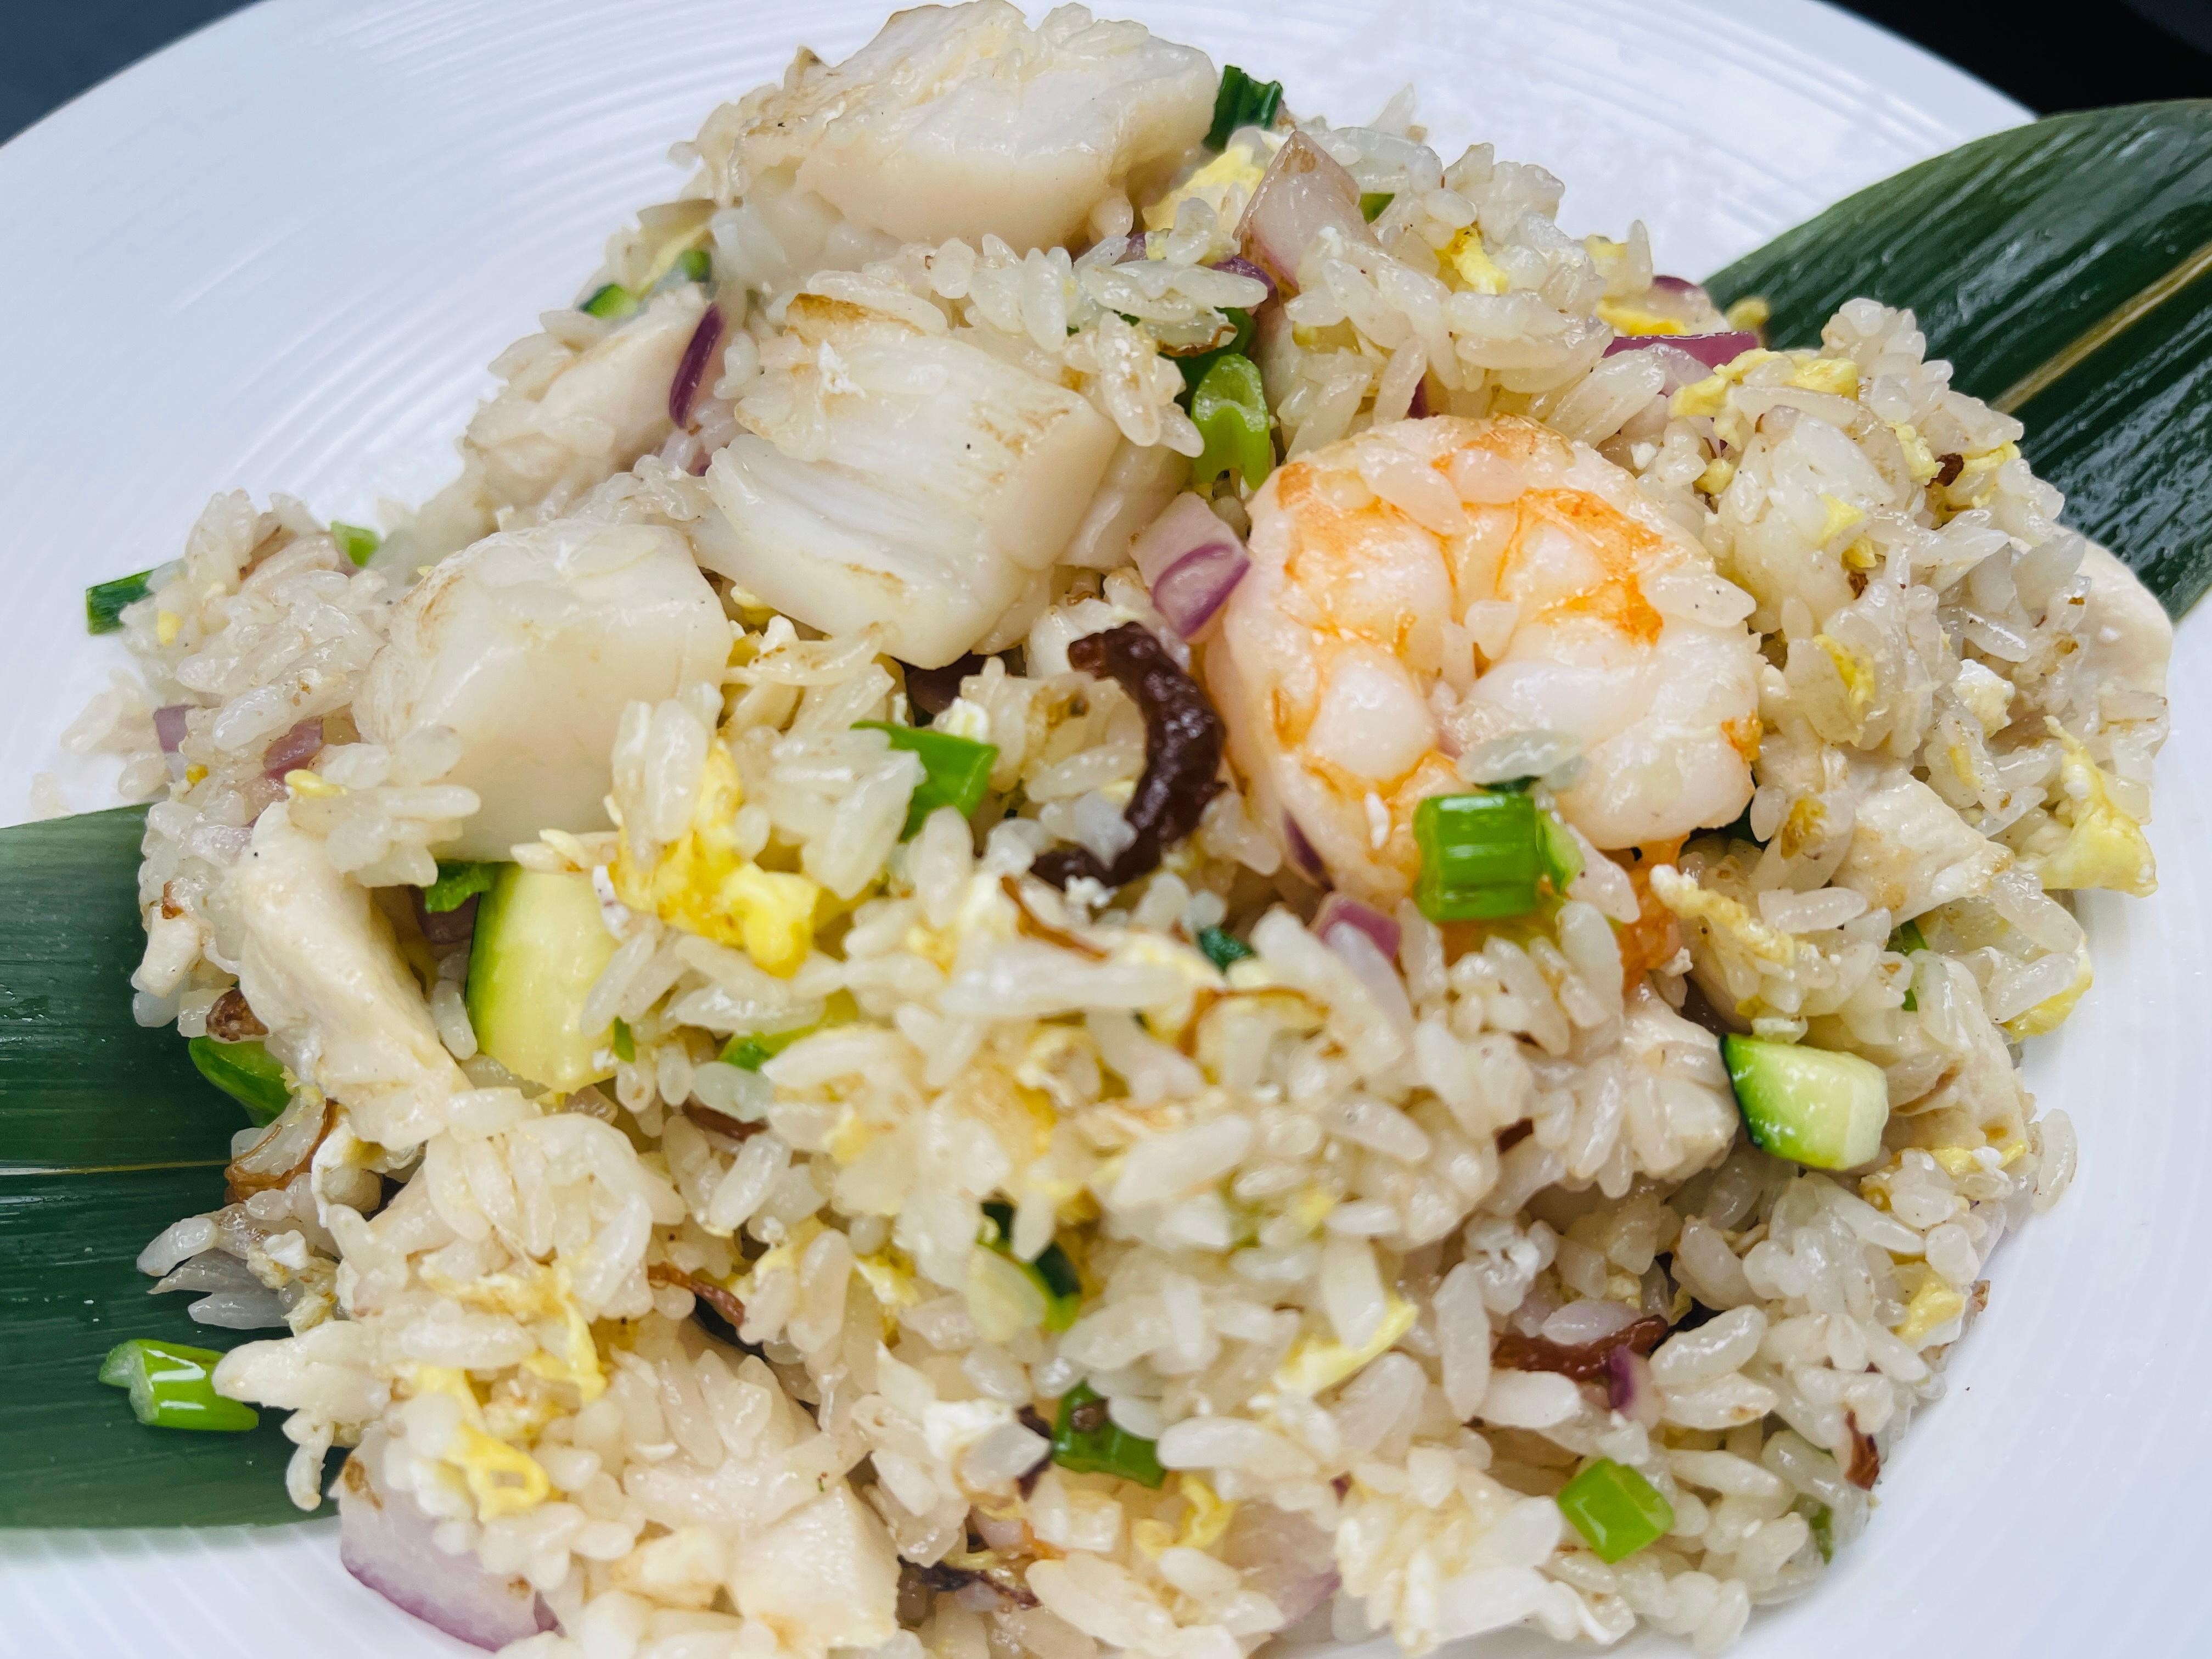 Feng Shui Fried Rice 本楼炒饭